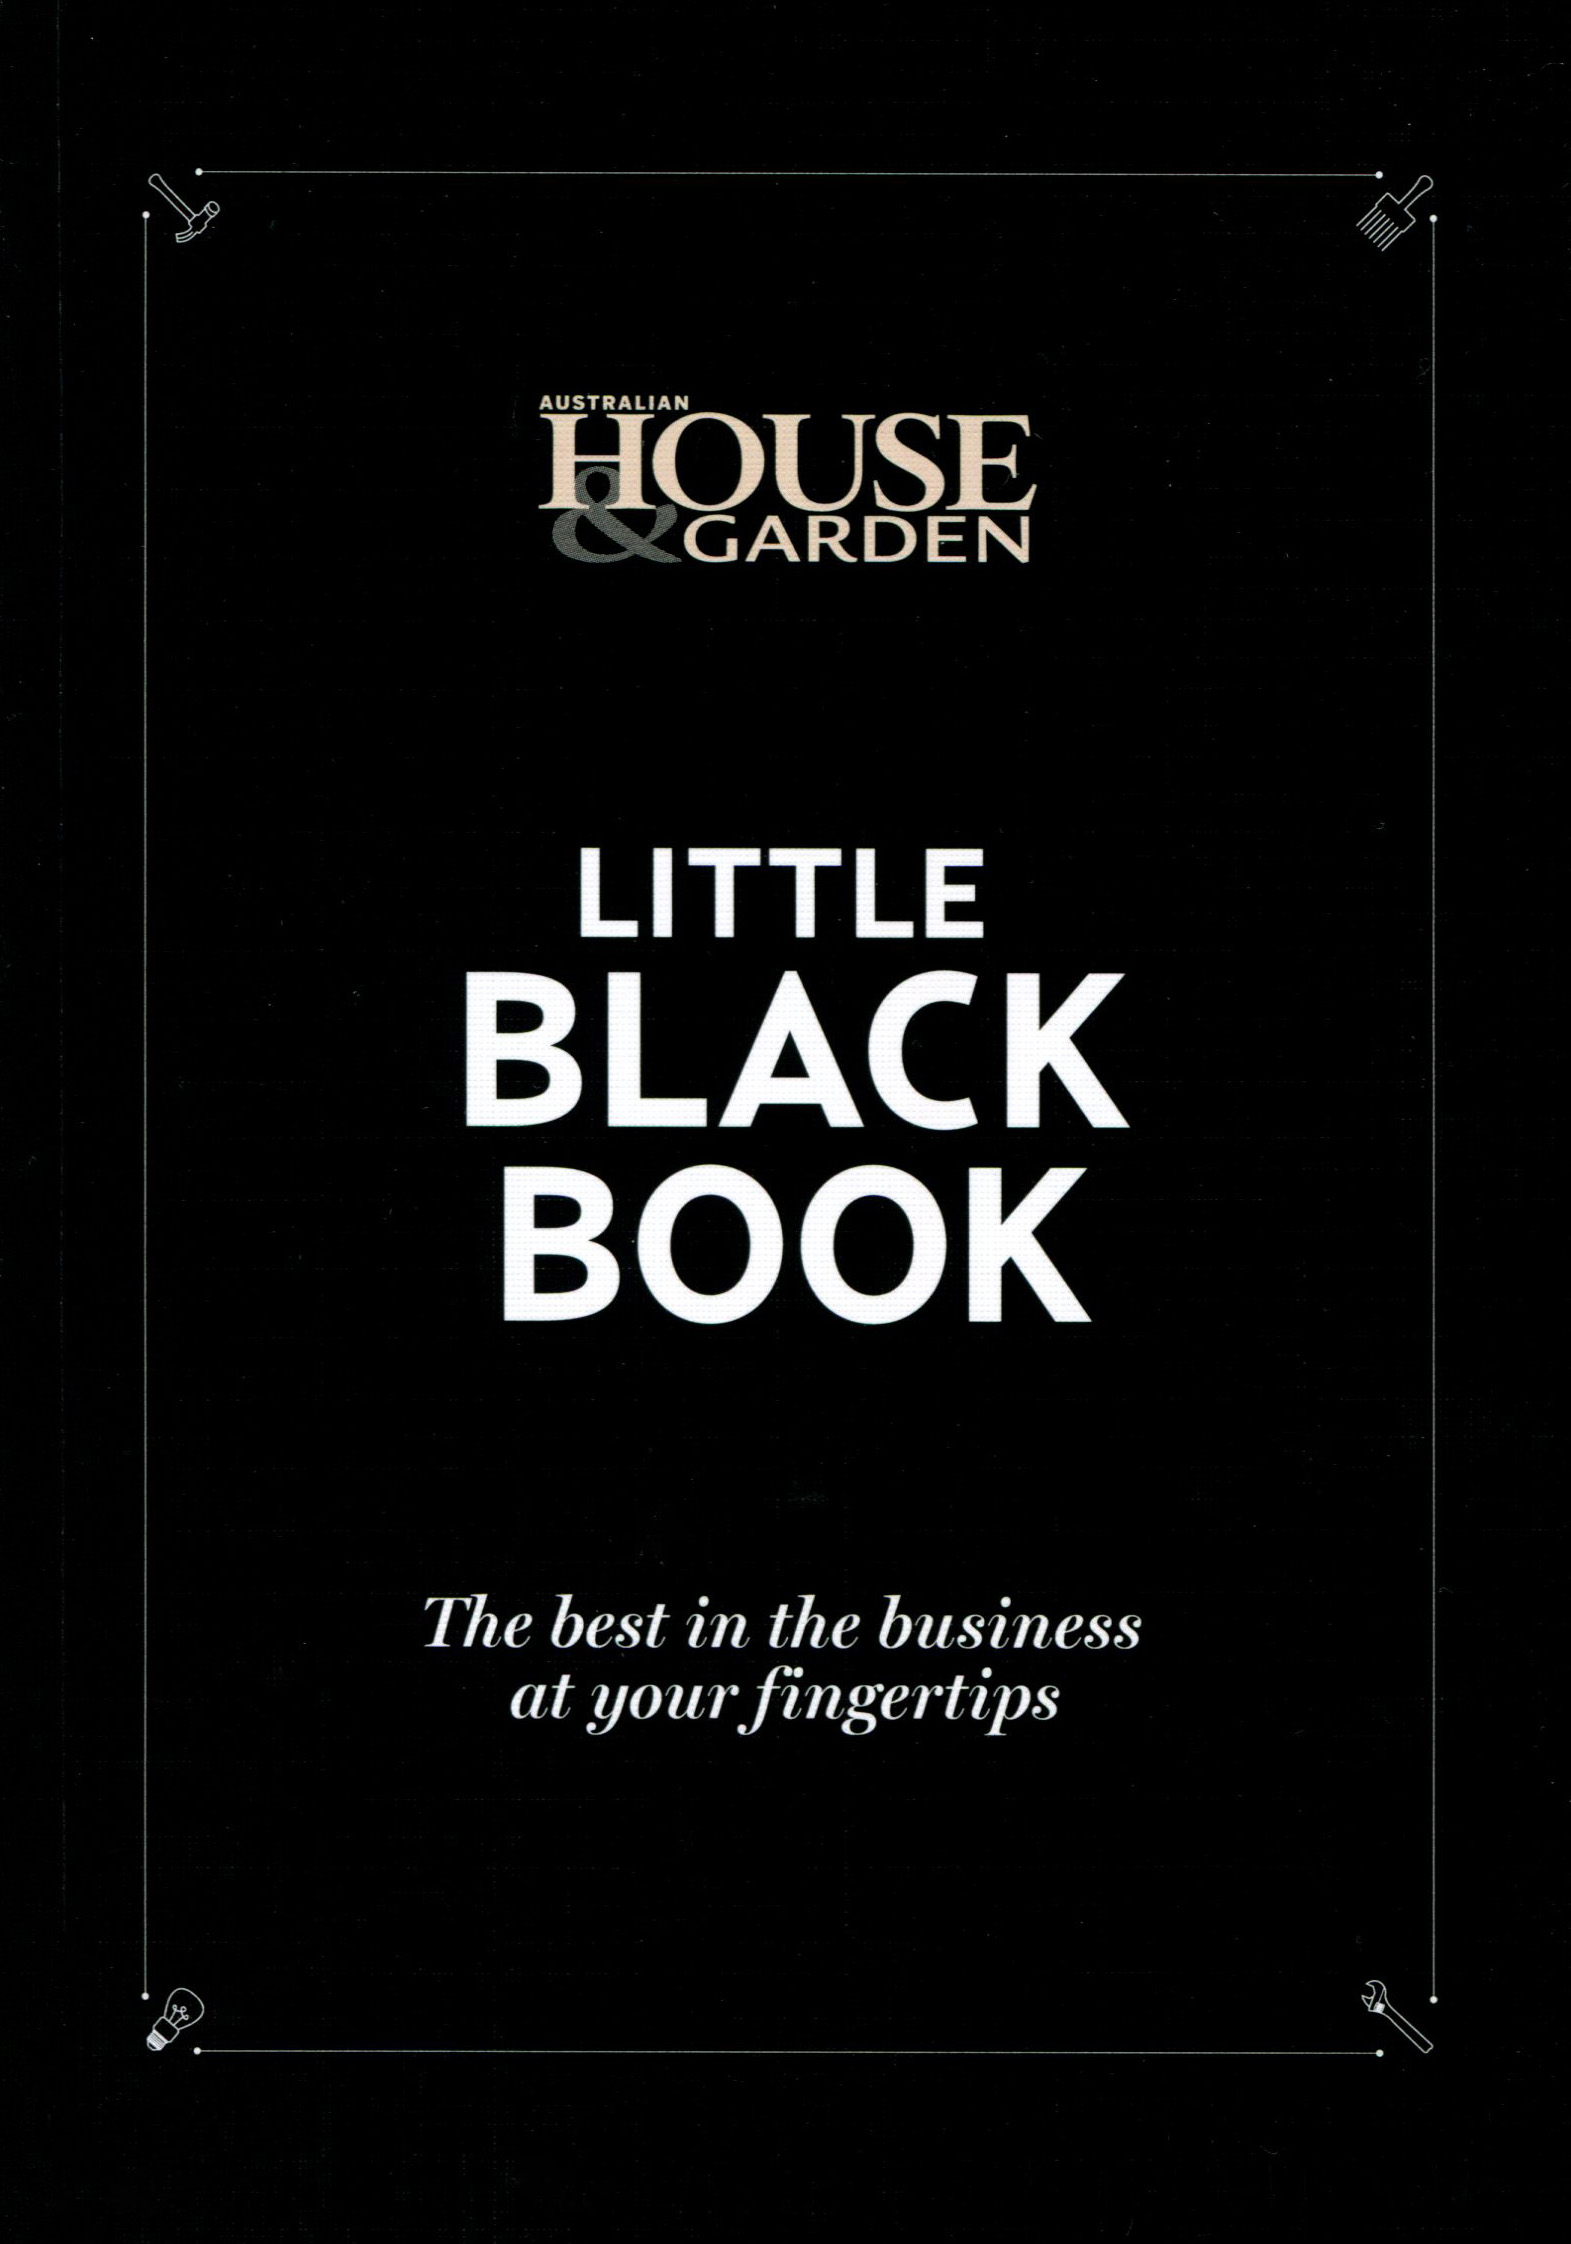 Ian Barker Gardens feature in House & Garden's Little Back Book, which 